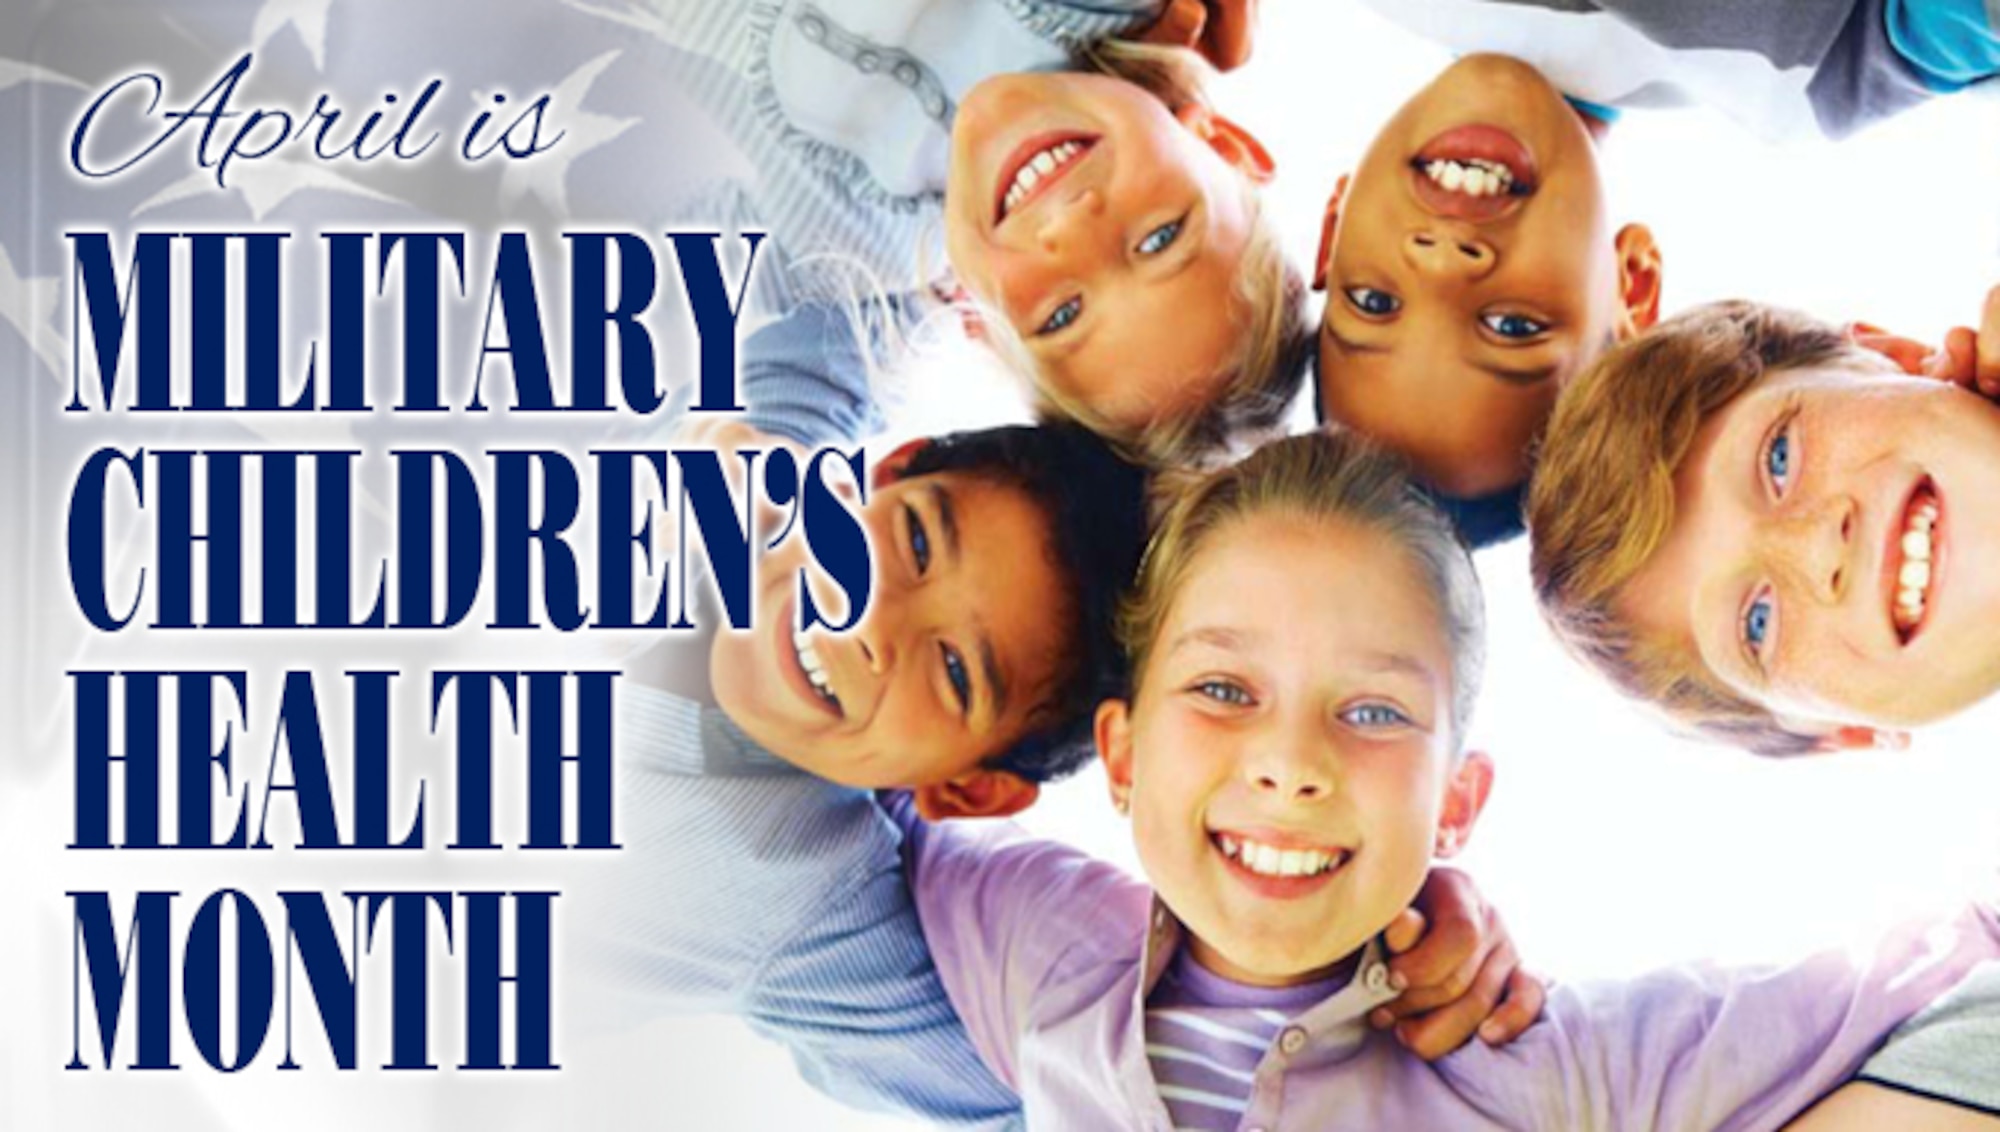 April is Military Children's Health Month website